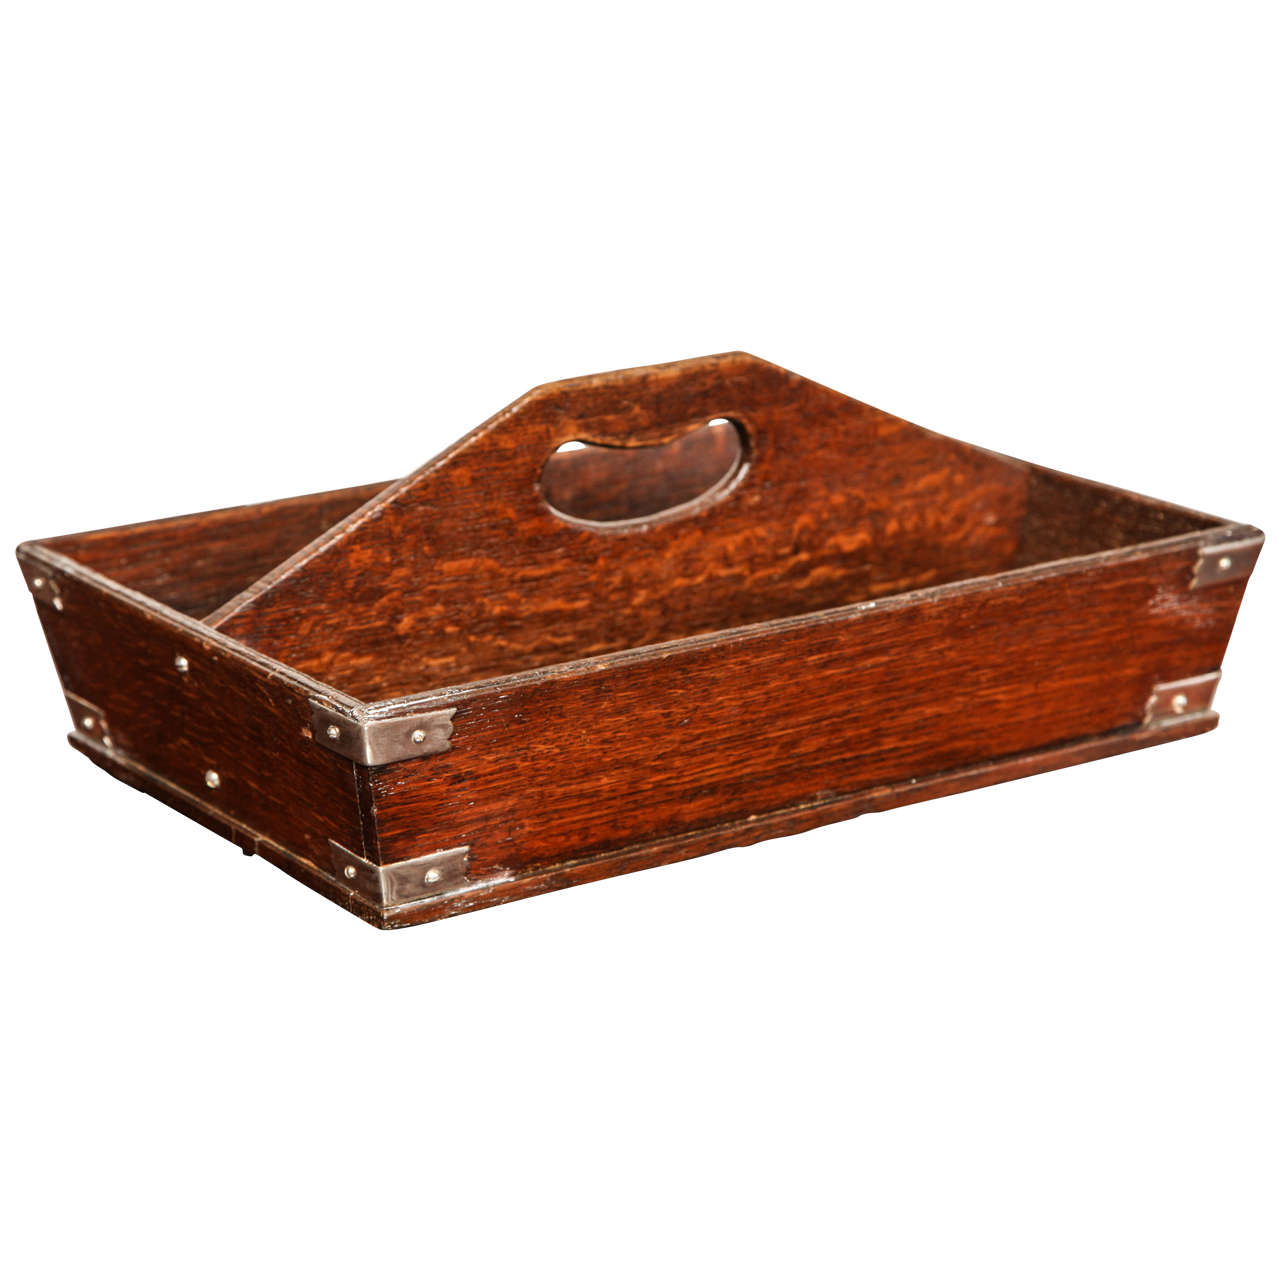 Late 19th Century Oak and Silver Mounted Cutlery Box